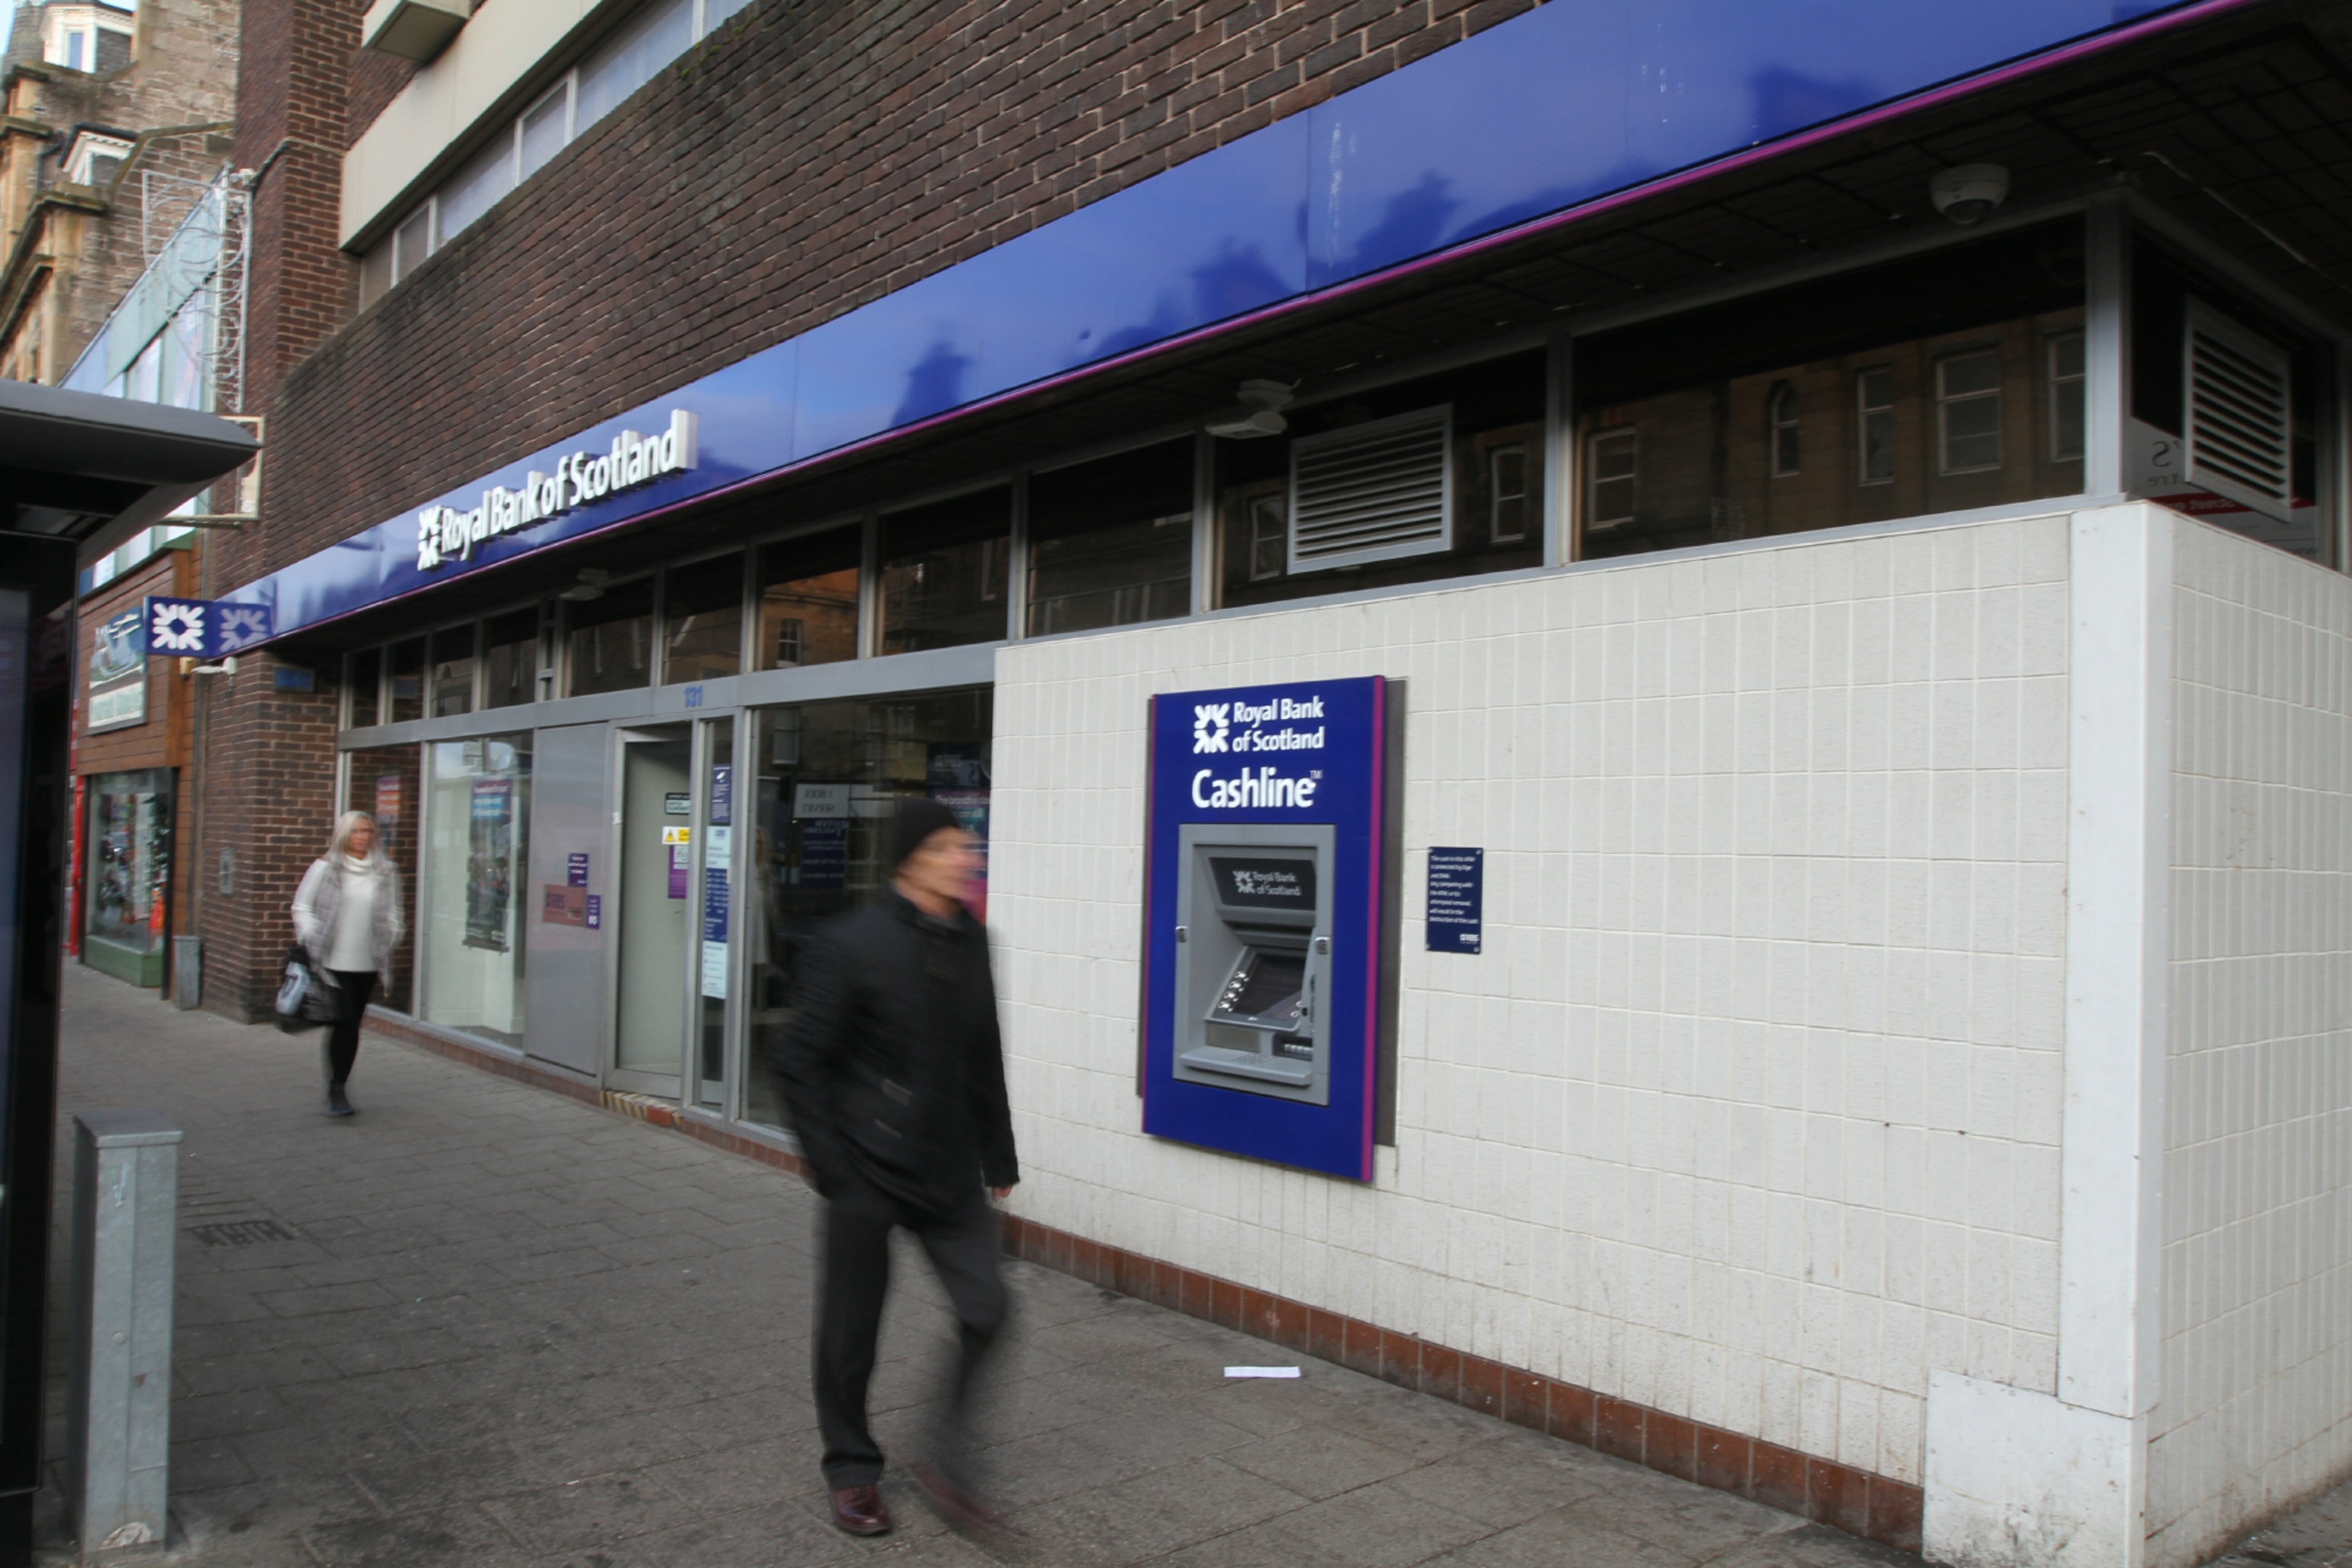 South Street Perth is one of the RBS branches that is marked for closure.